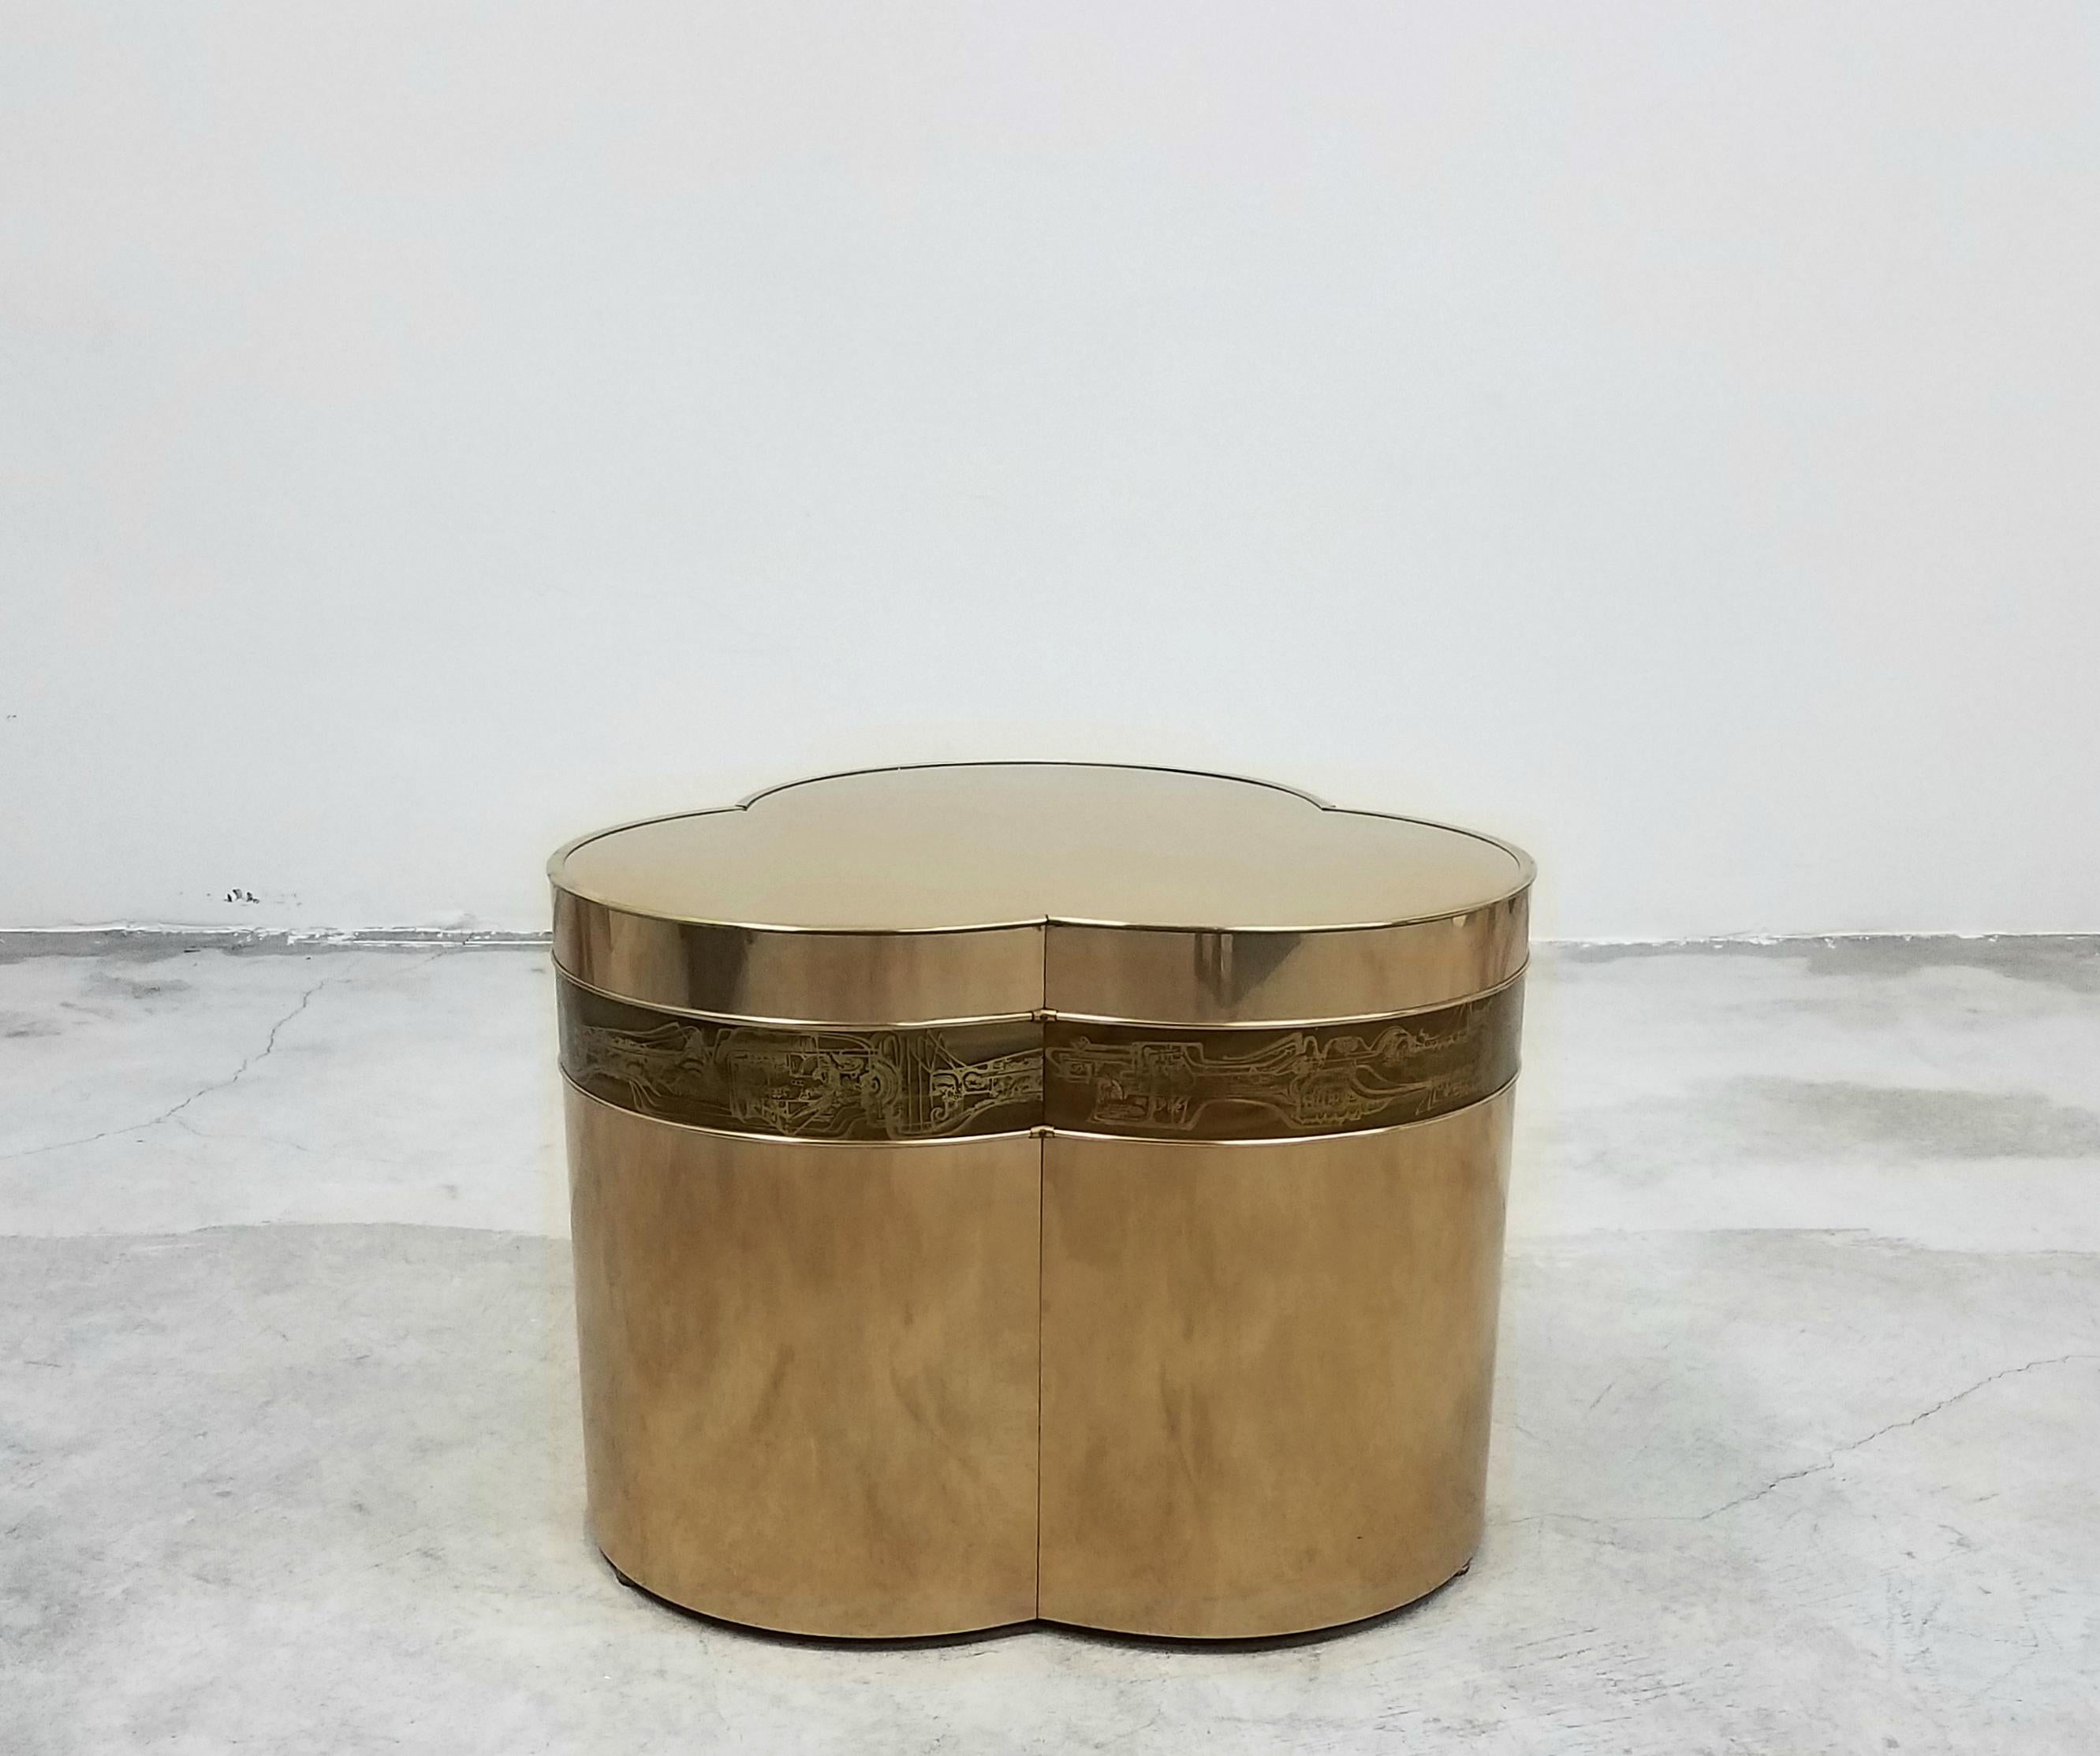 A beautiful trefoil shaped bronze side table with acid etched details characteristic of Bernhard Rohne pieces. A unique and rare piece.

Makes a beautiful side table but is substantial enough to be used as a coffee table, just add glass.